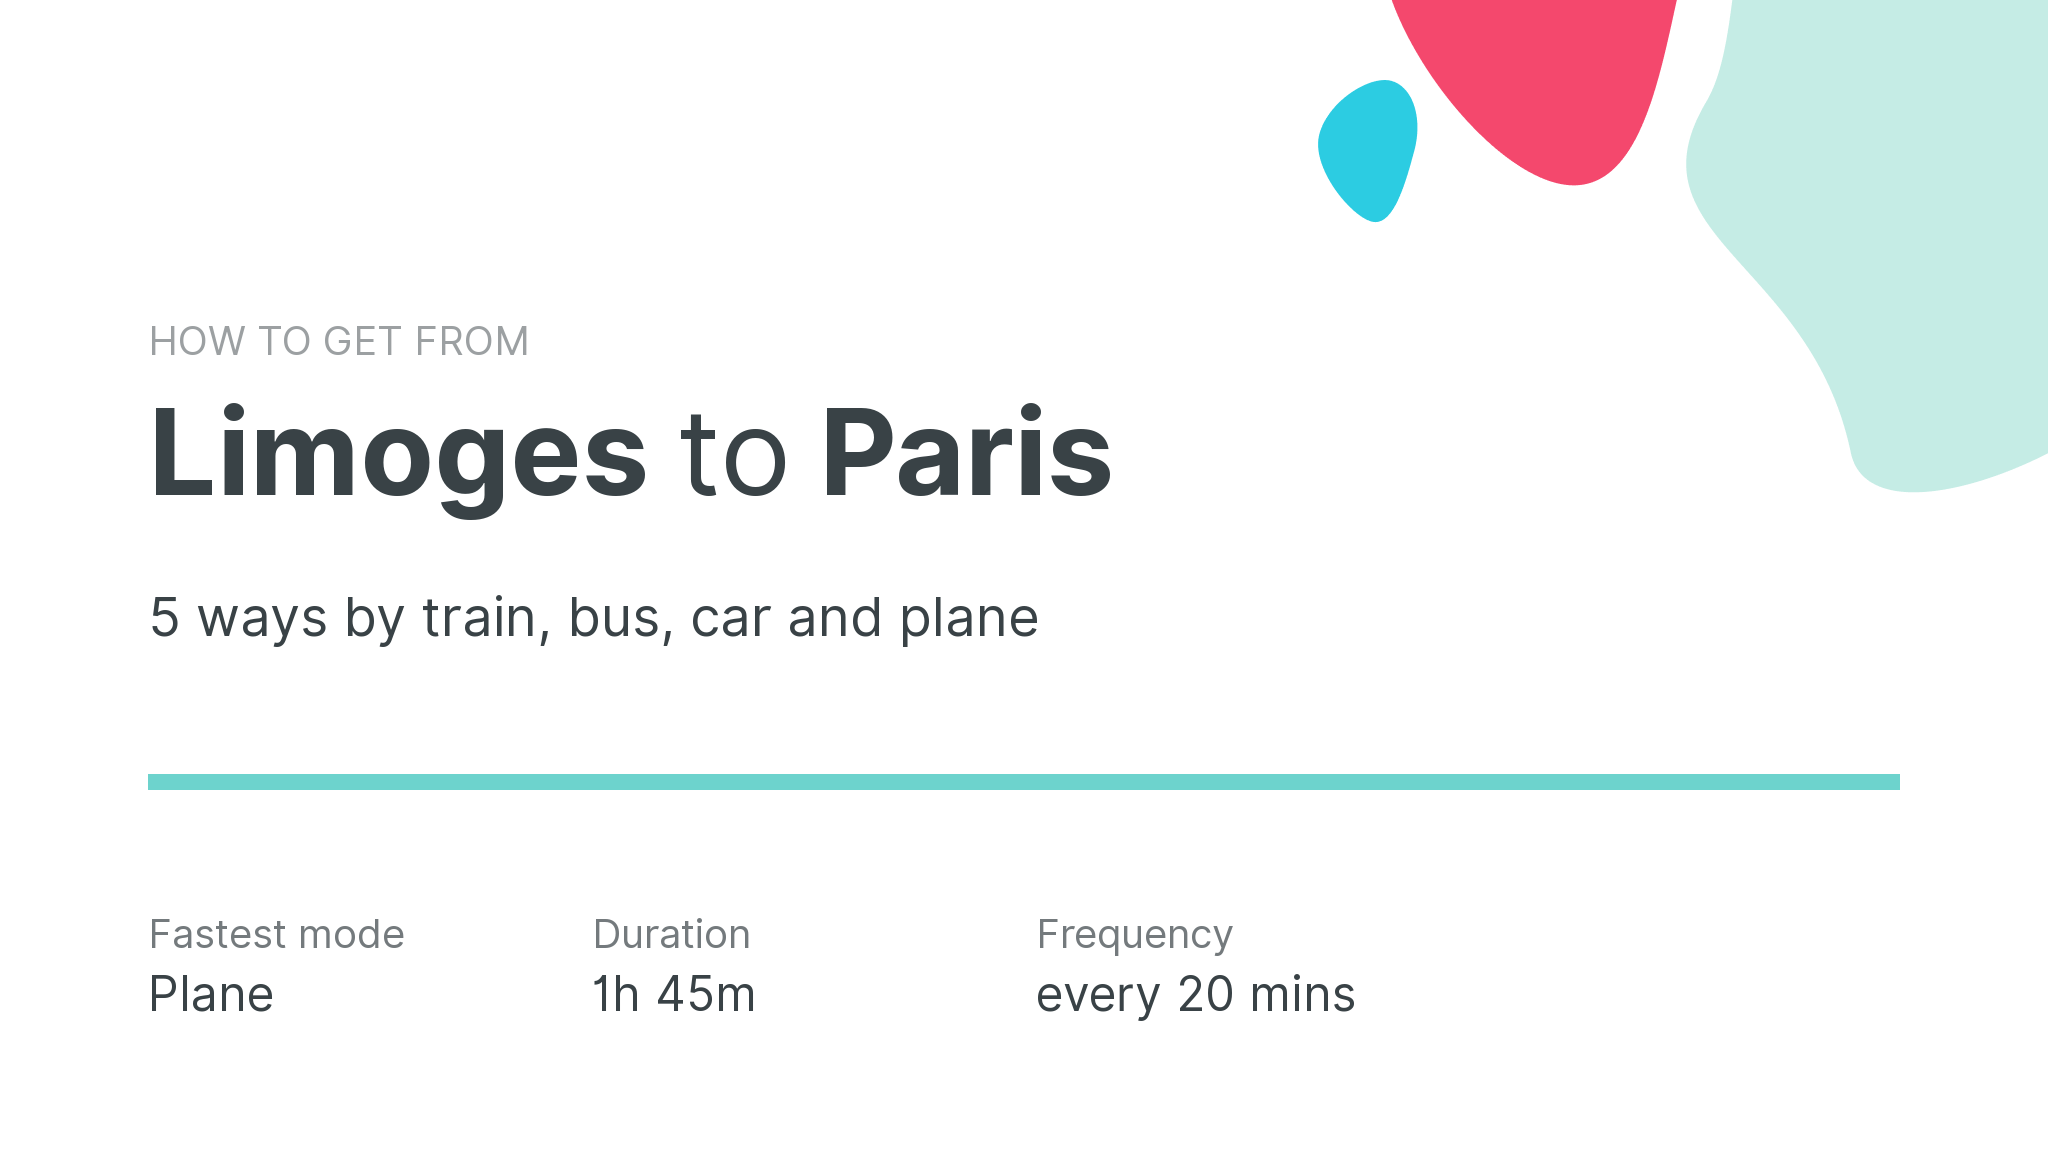 How do I get from Limoges to Paris